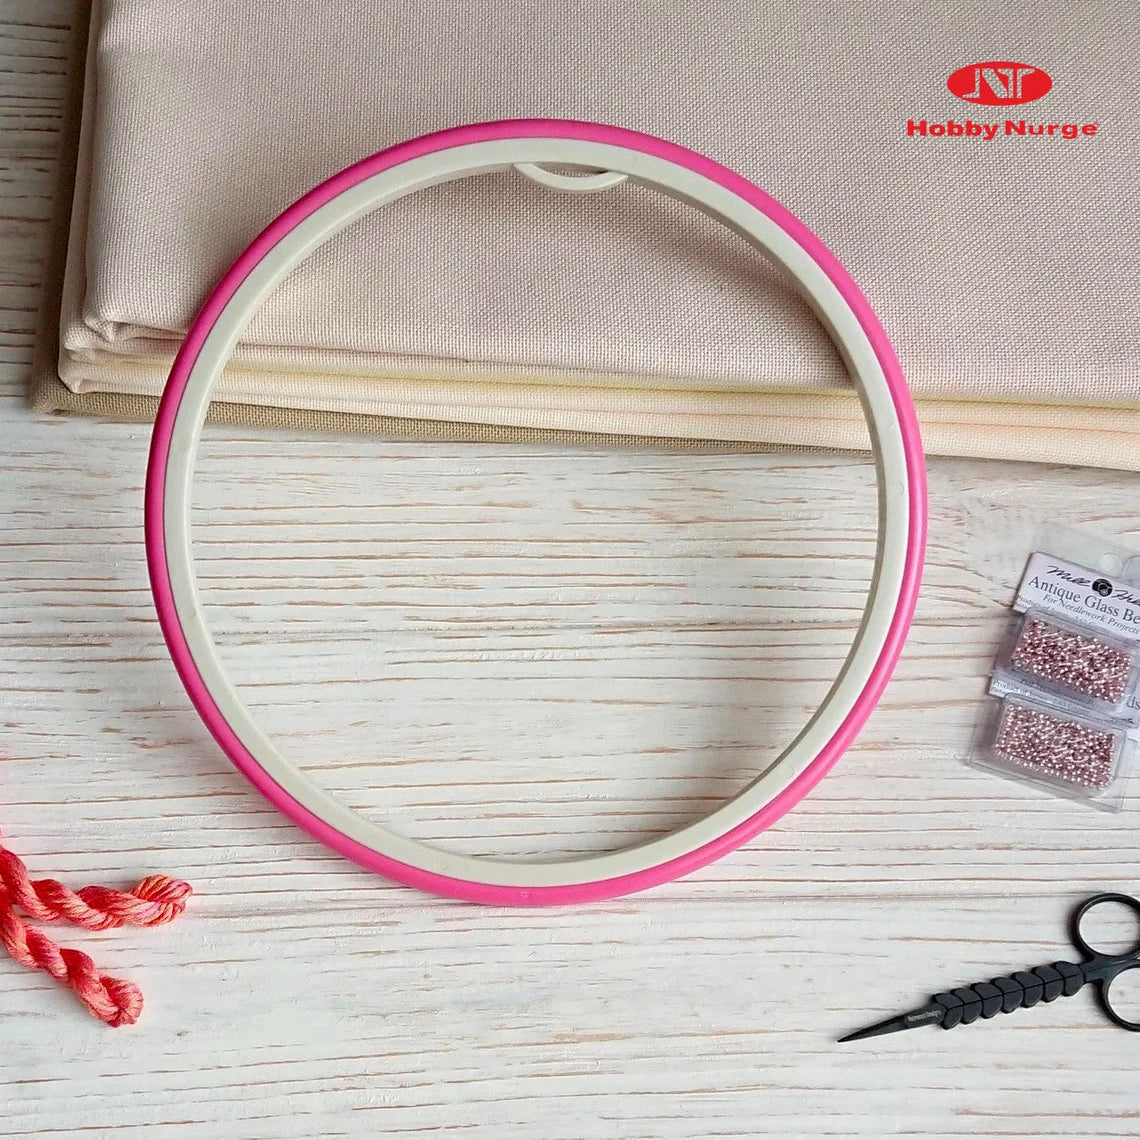 Embroidery Hoops - Plastic Embroidery Hoop With Elastic Fastening, Round